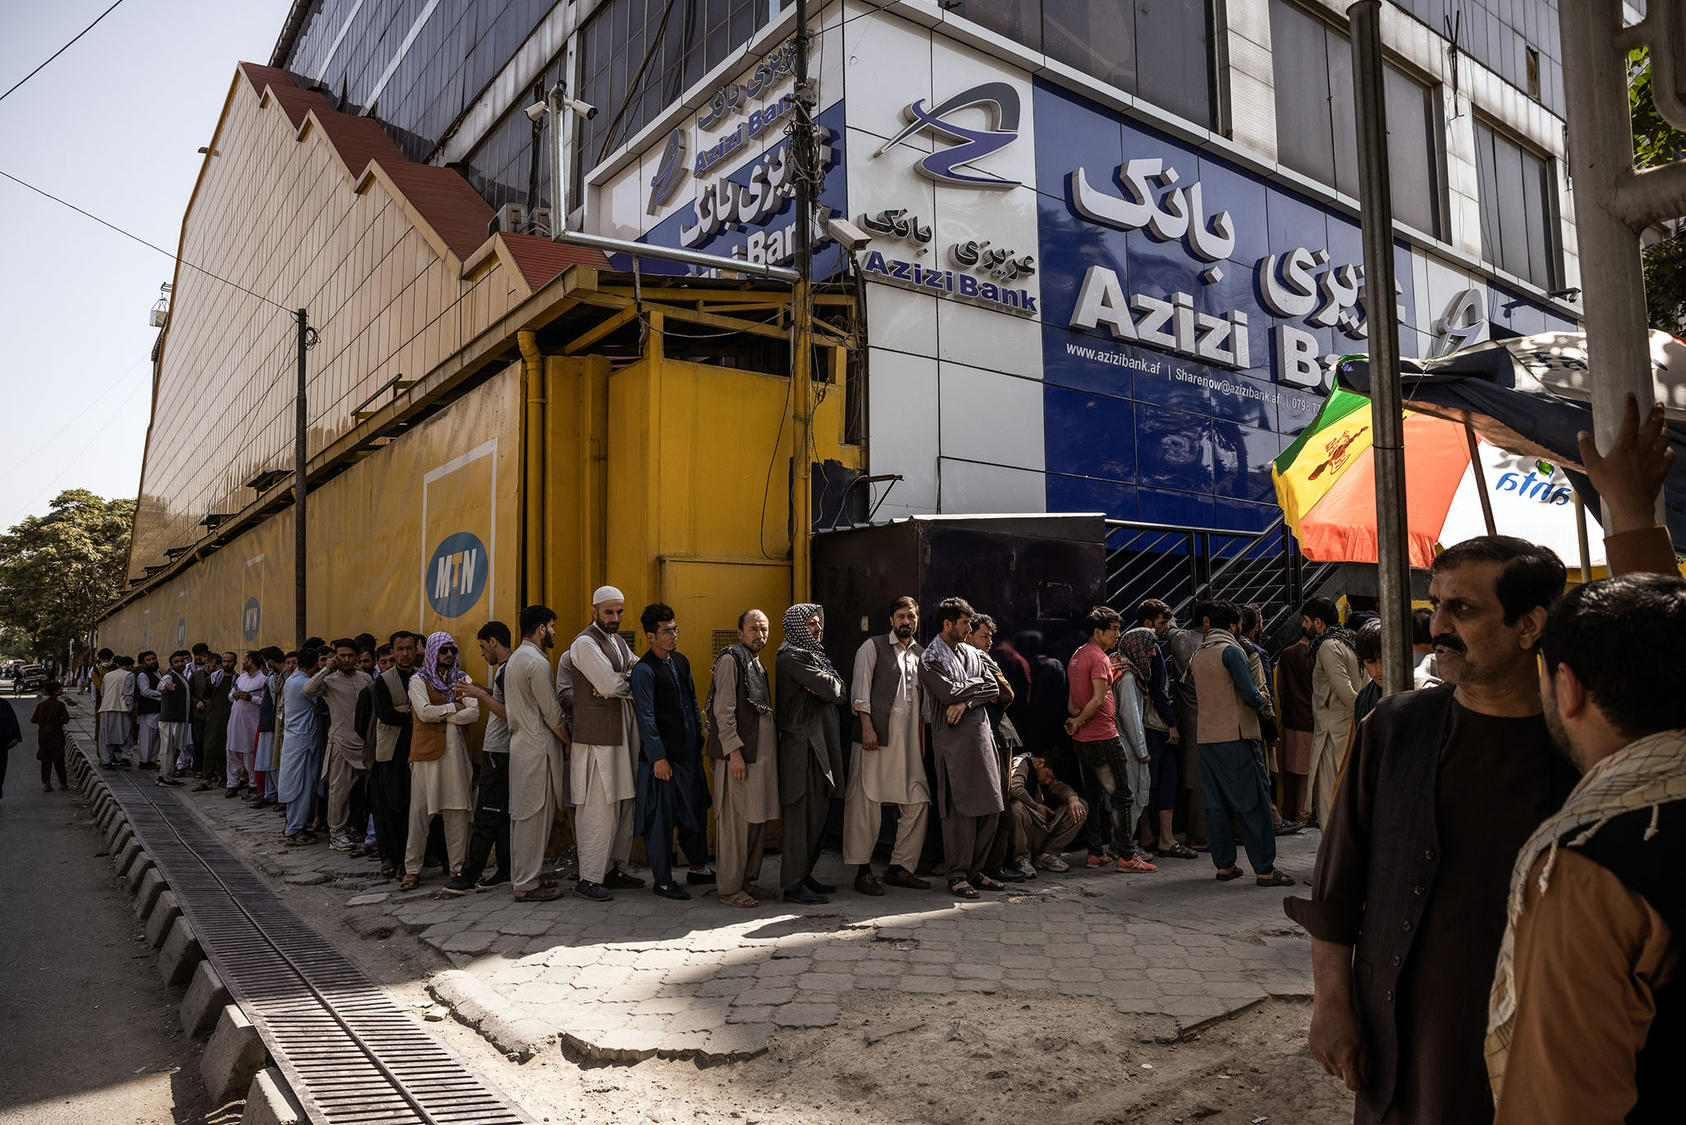 A line of people waiting outside a bank in Kabul, Afghanistan. August 29, 2021. (Jim Huylebroek/The New York Times)